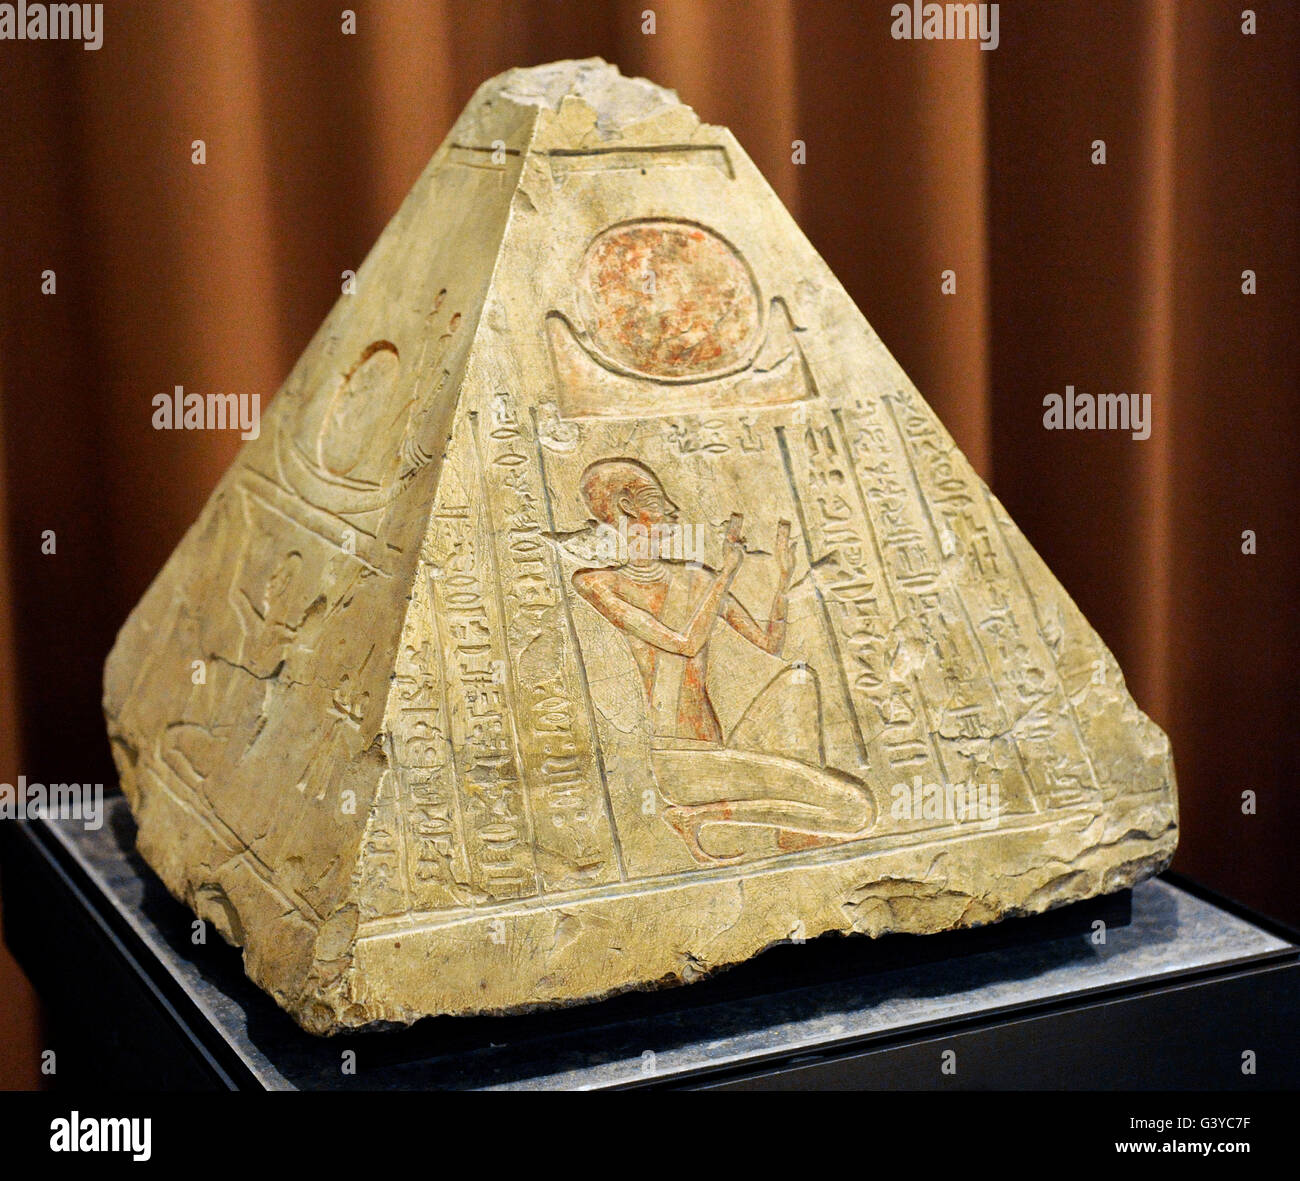 Pyramidion from the tomb of priest Rer. 7th century BCE. Abydos, Egypt. Limestone. The State Hermitage Museum. Saint Petersburg. Russia. Stock Photo